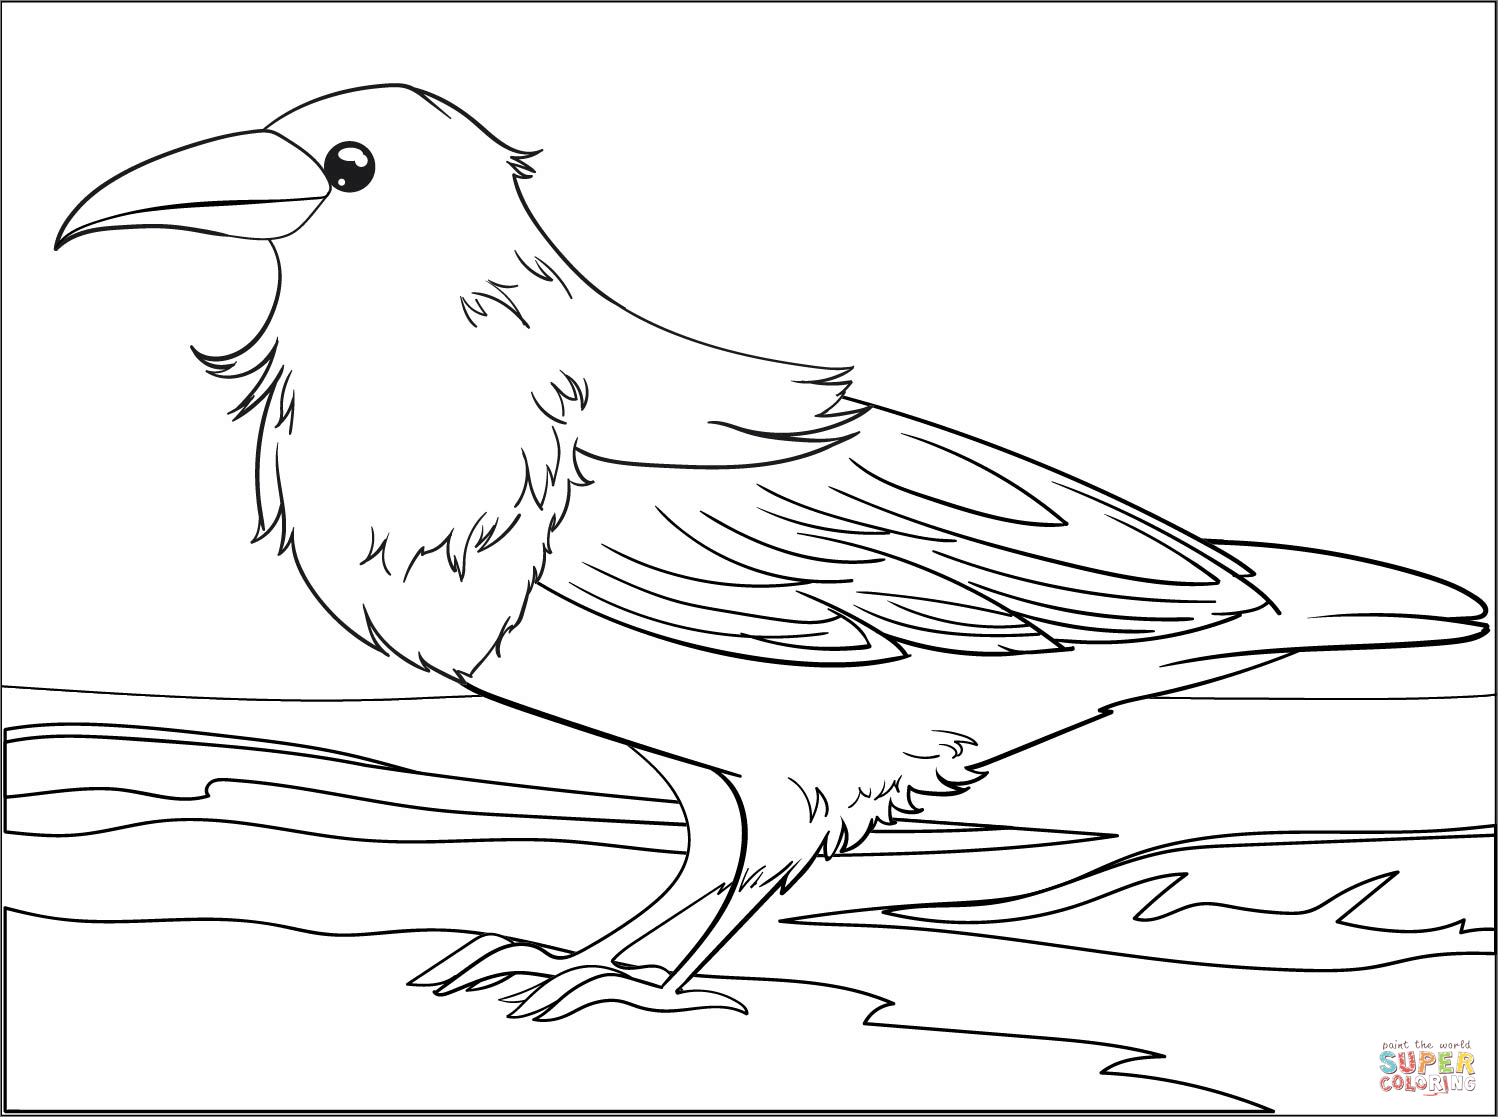 Raven coloring page free printable coloring pages